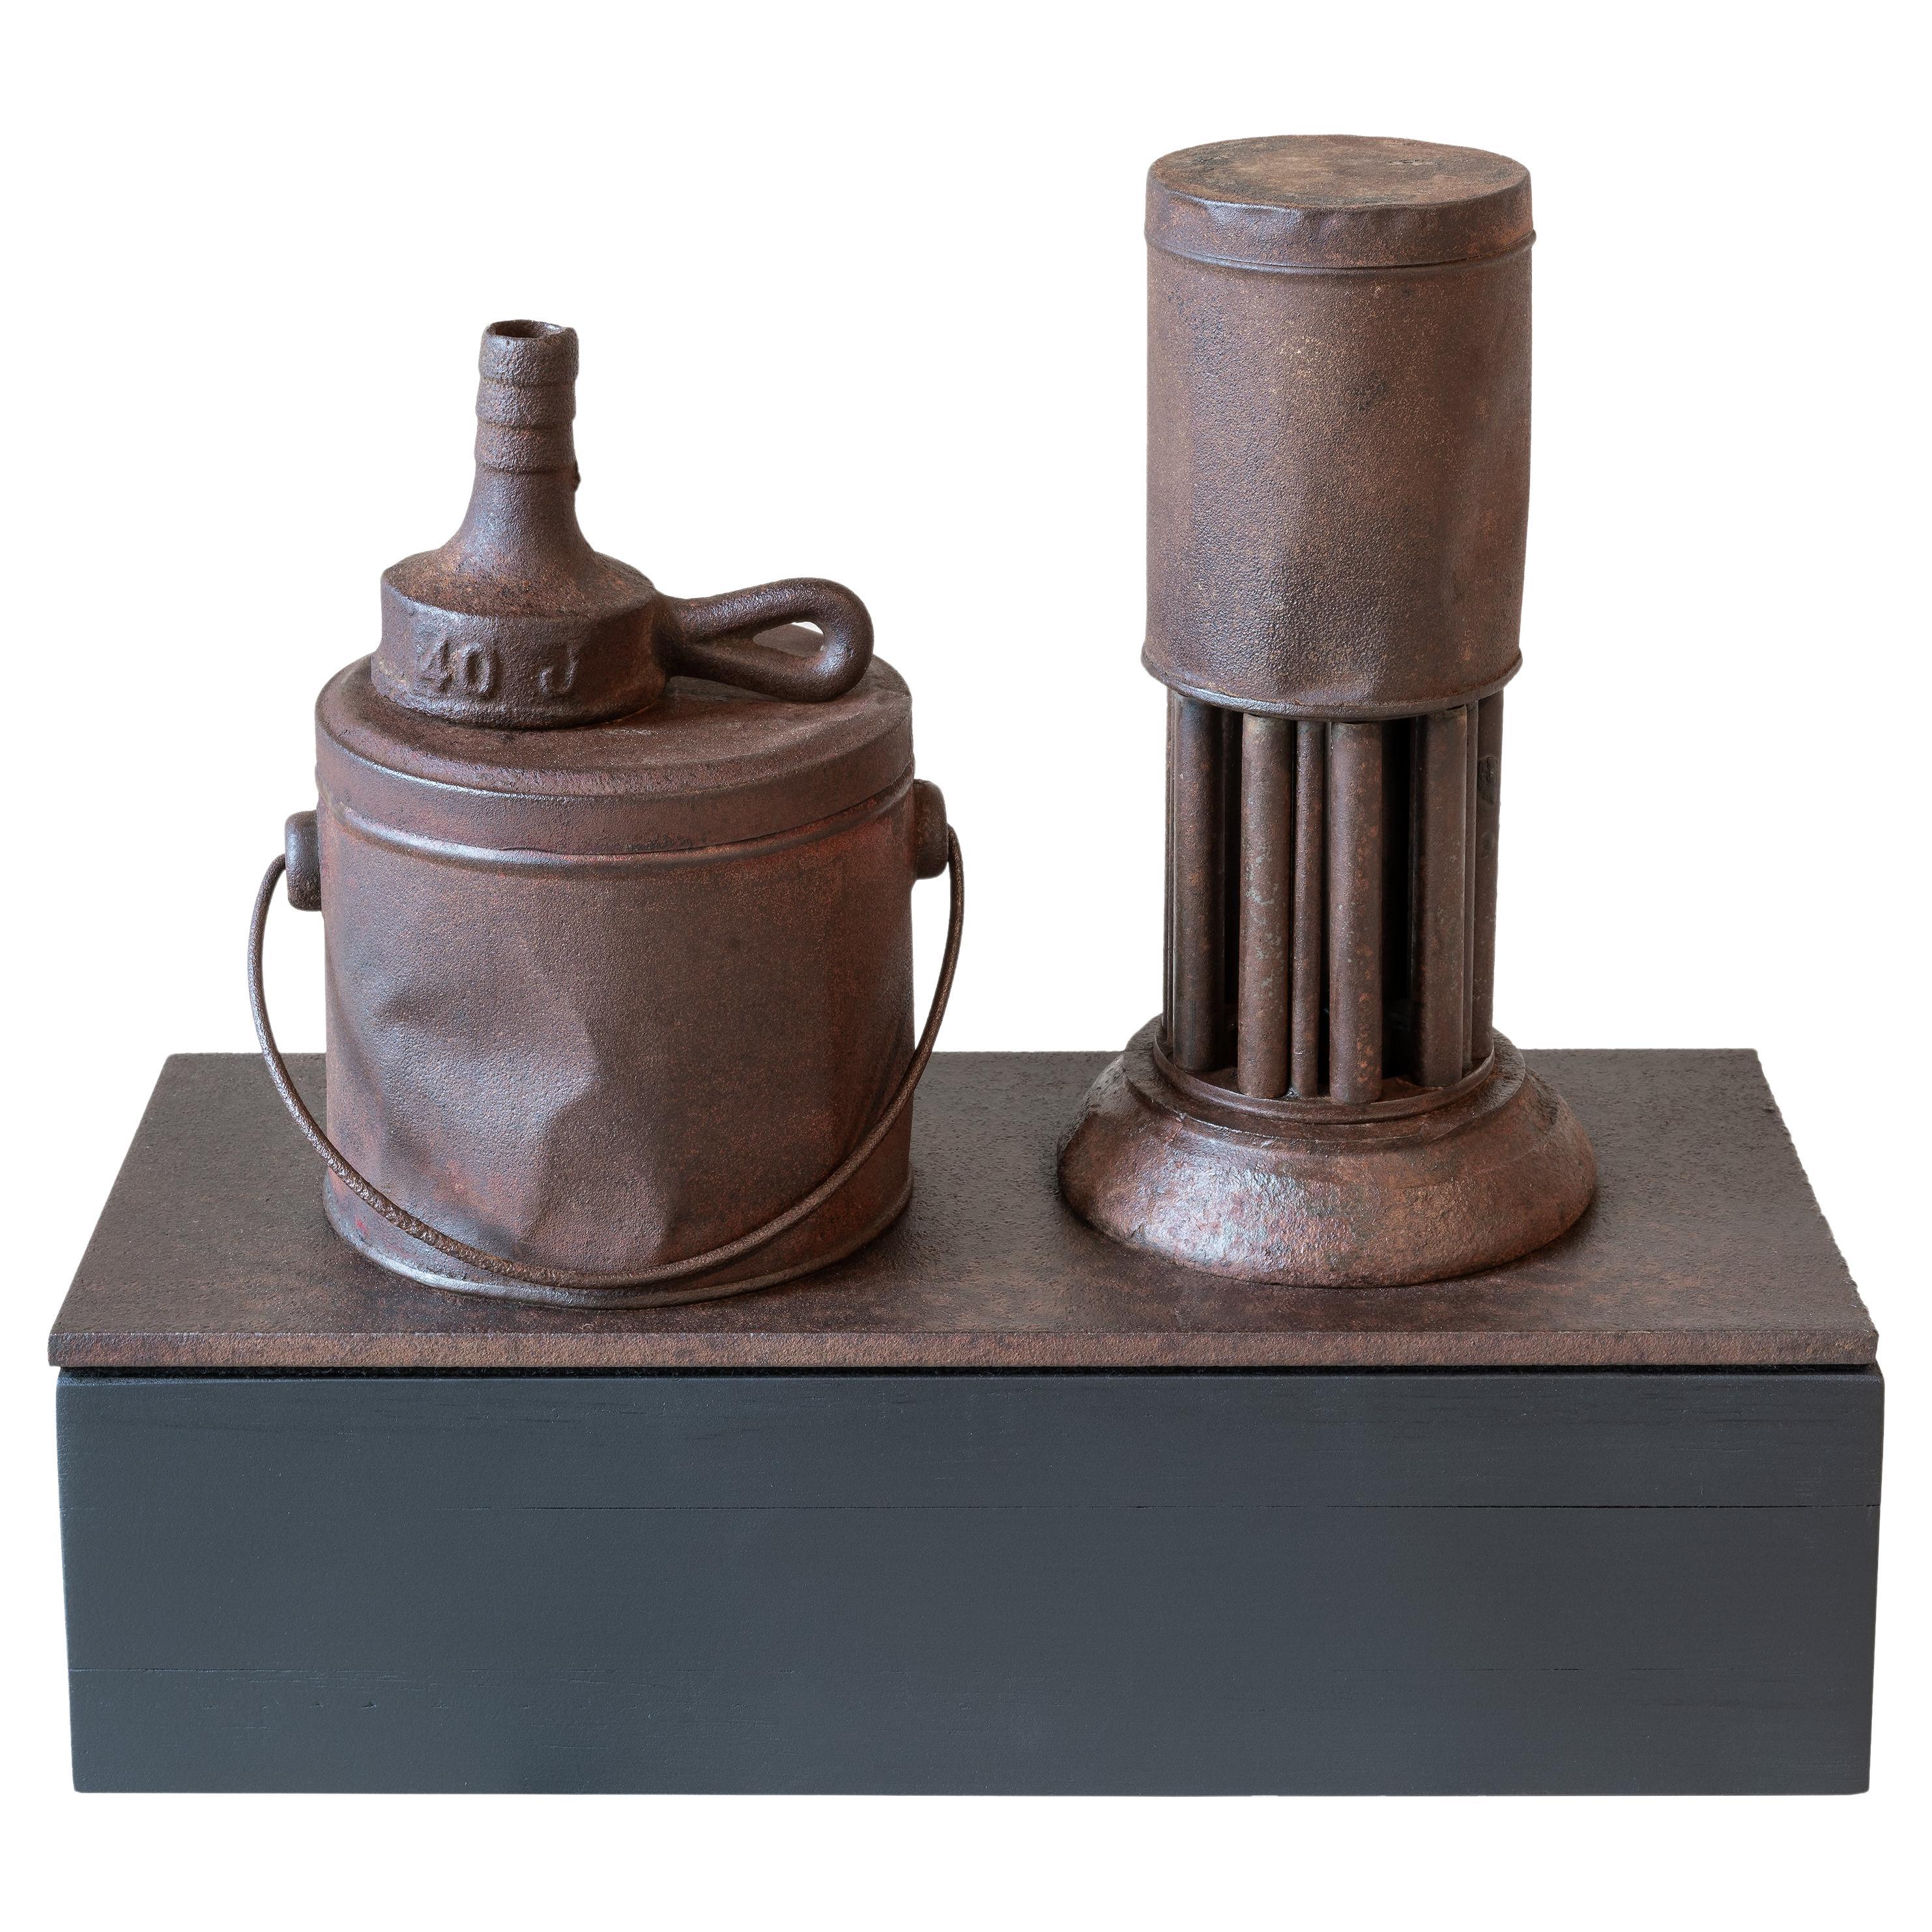 Found and Salvaged Industrial Objects, Metal Sculpture on Base